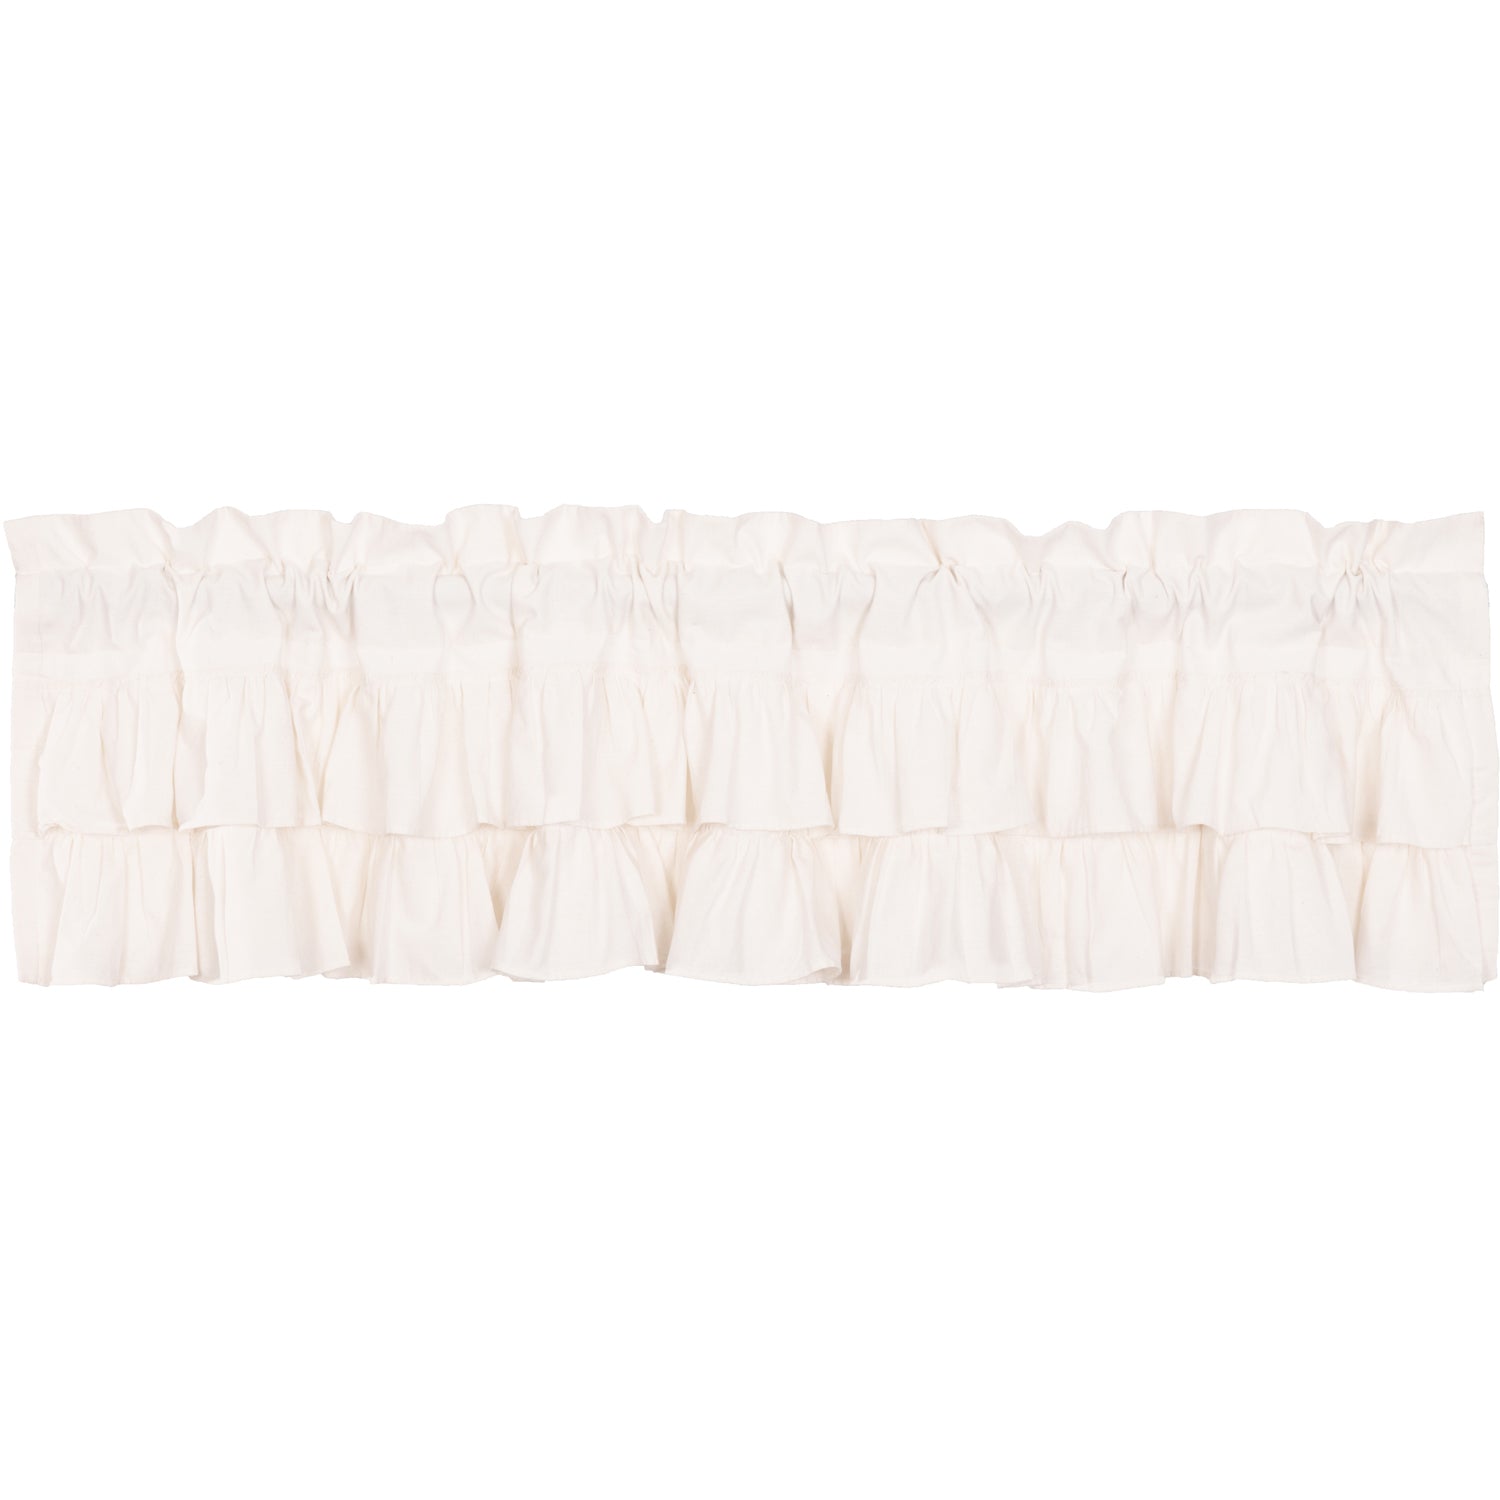 April & Olive Simple Life Flax Antique White Ruffled Valance 16x72 By VHC Brands